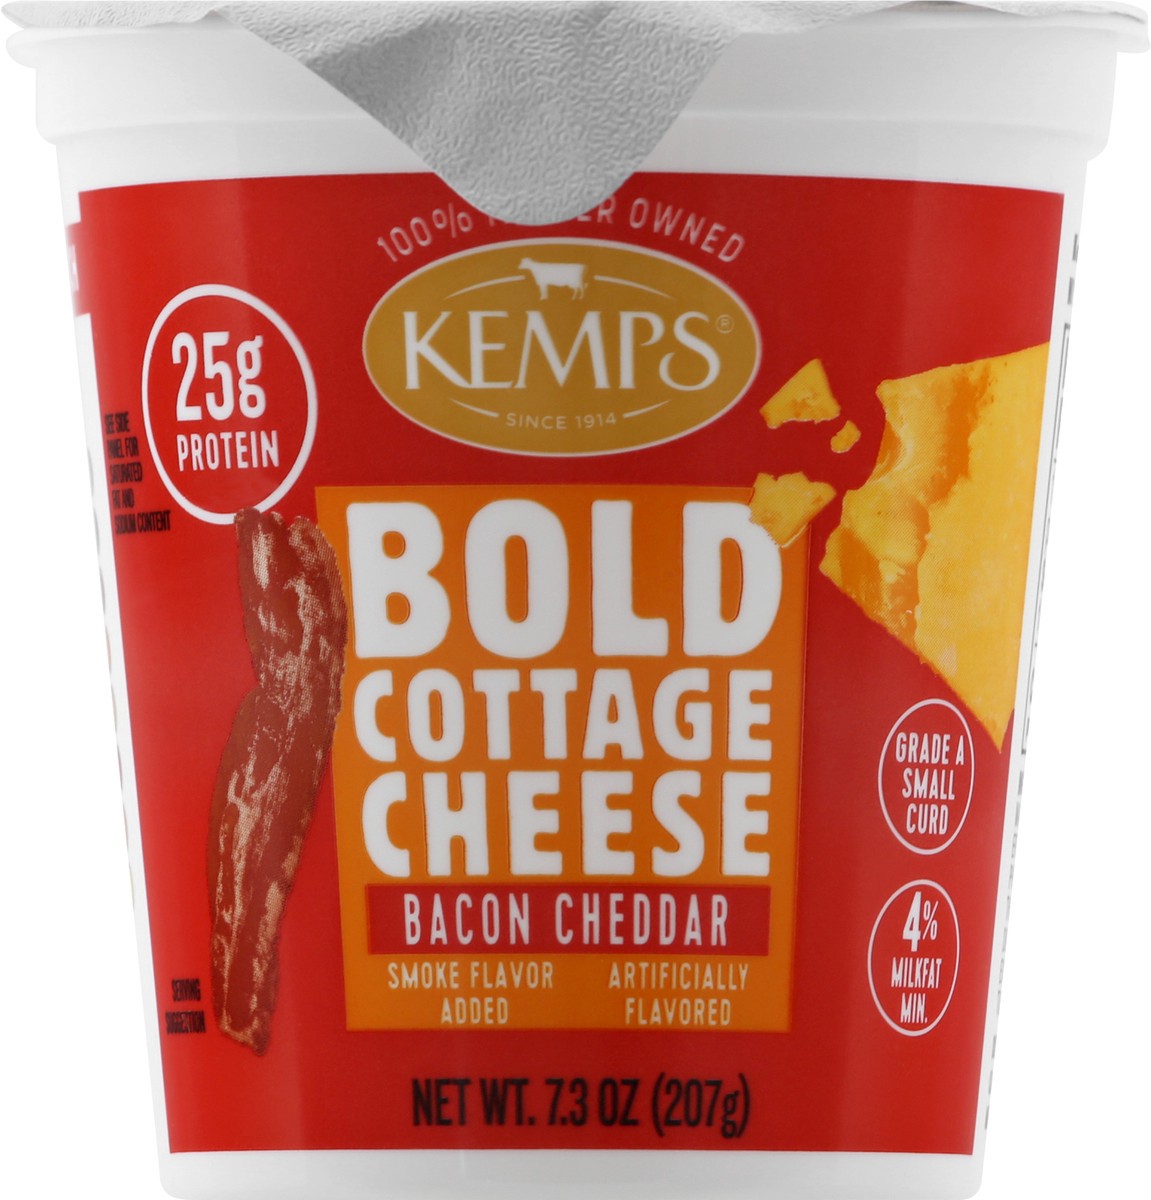 slide 2 of 13, Kemps Small Curd 4% Milkfat Min Bold Bacon Cheddar Cottage Cheese 7.3 oz, 7.3 oz